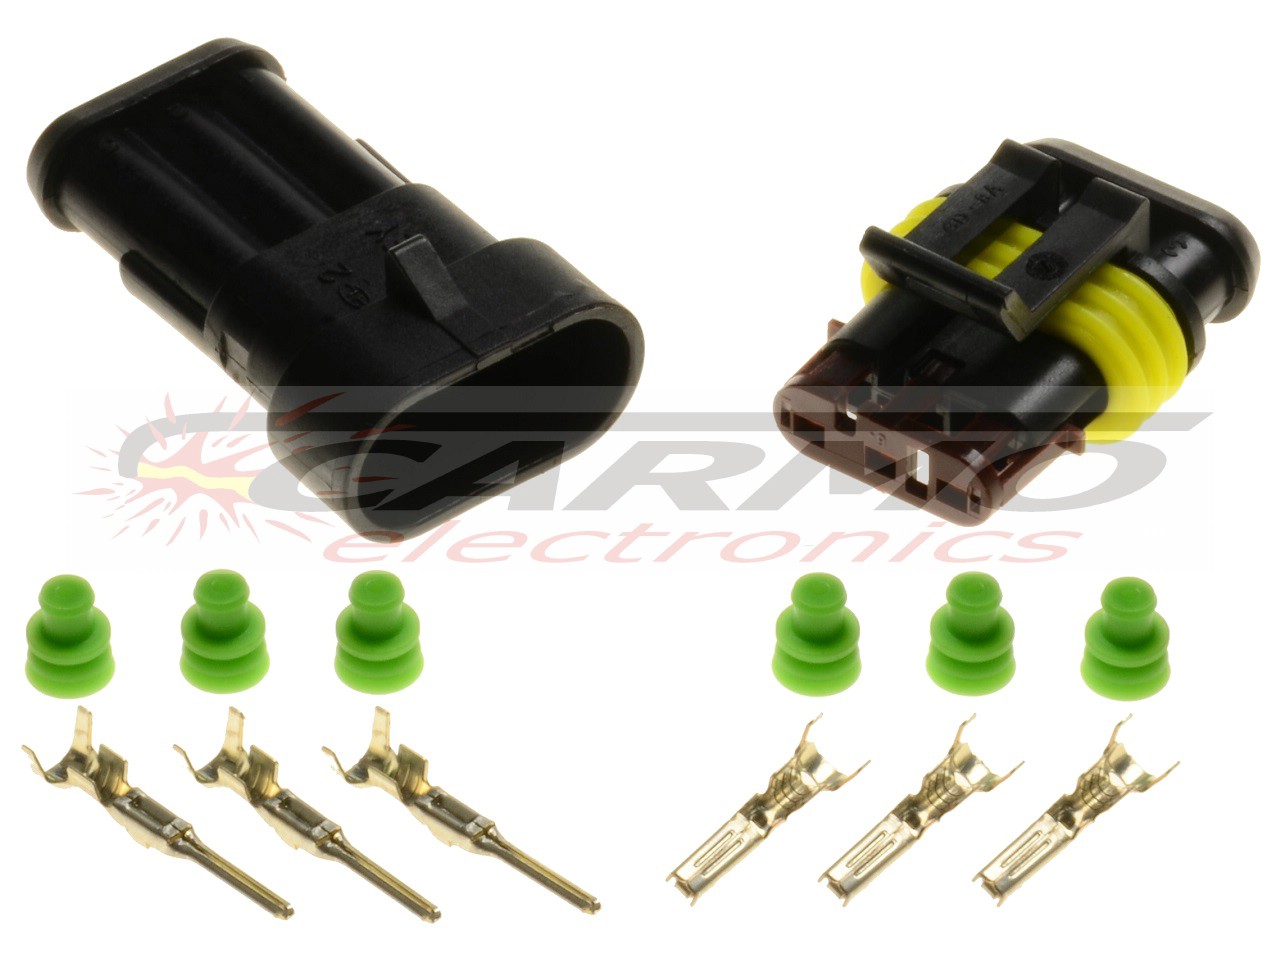 3 pin 1.5 superseal connector set - Click Image to Close